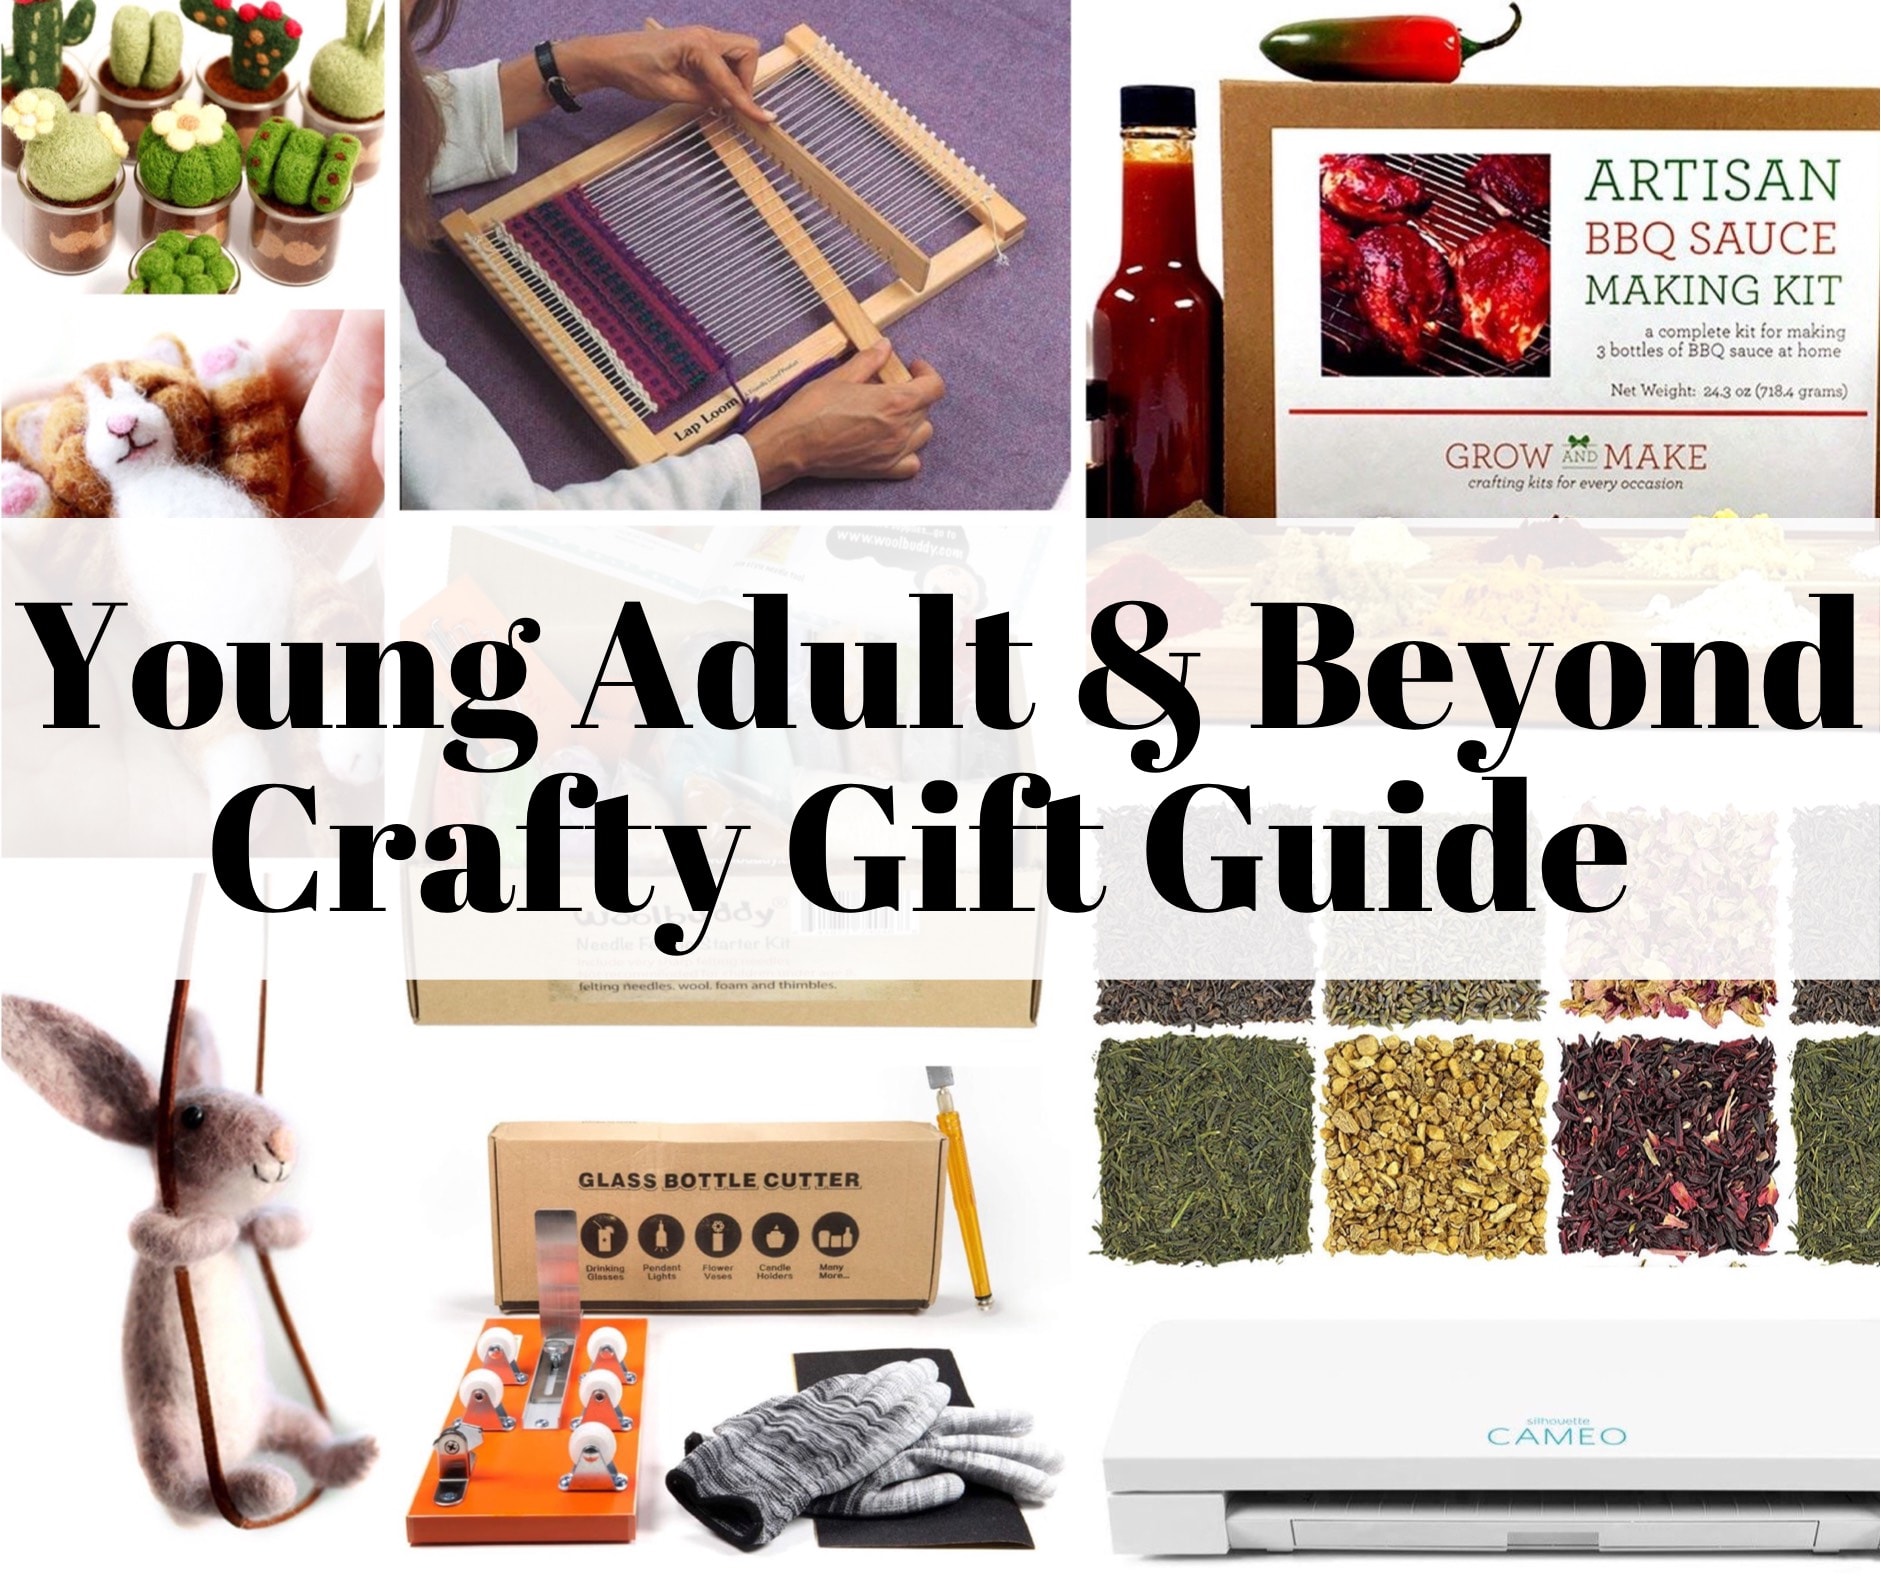 18 Christmas Gifts for Your Boyfriend - Smarty n'Crafty